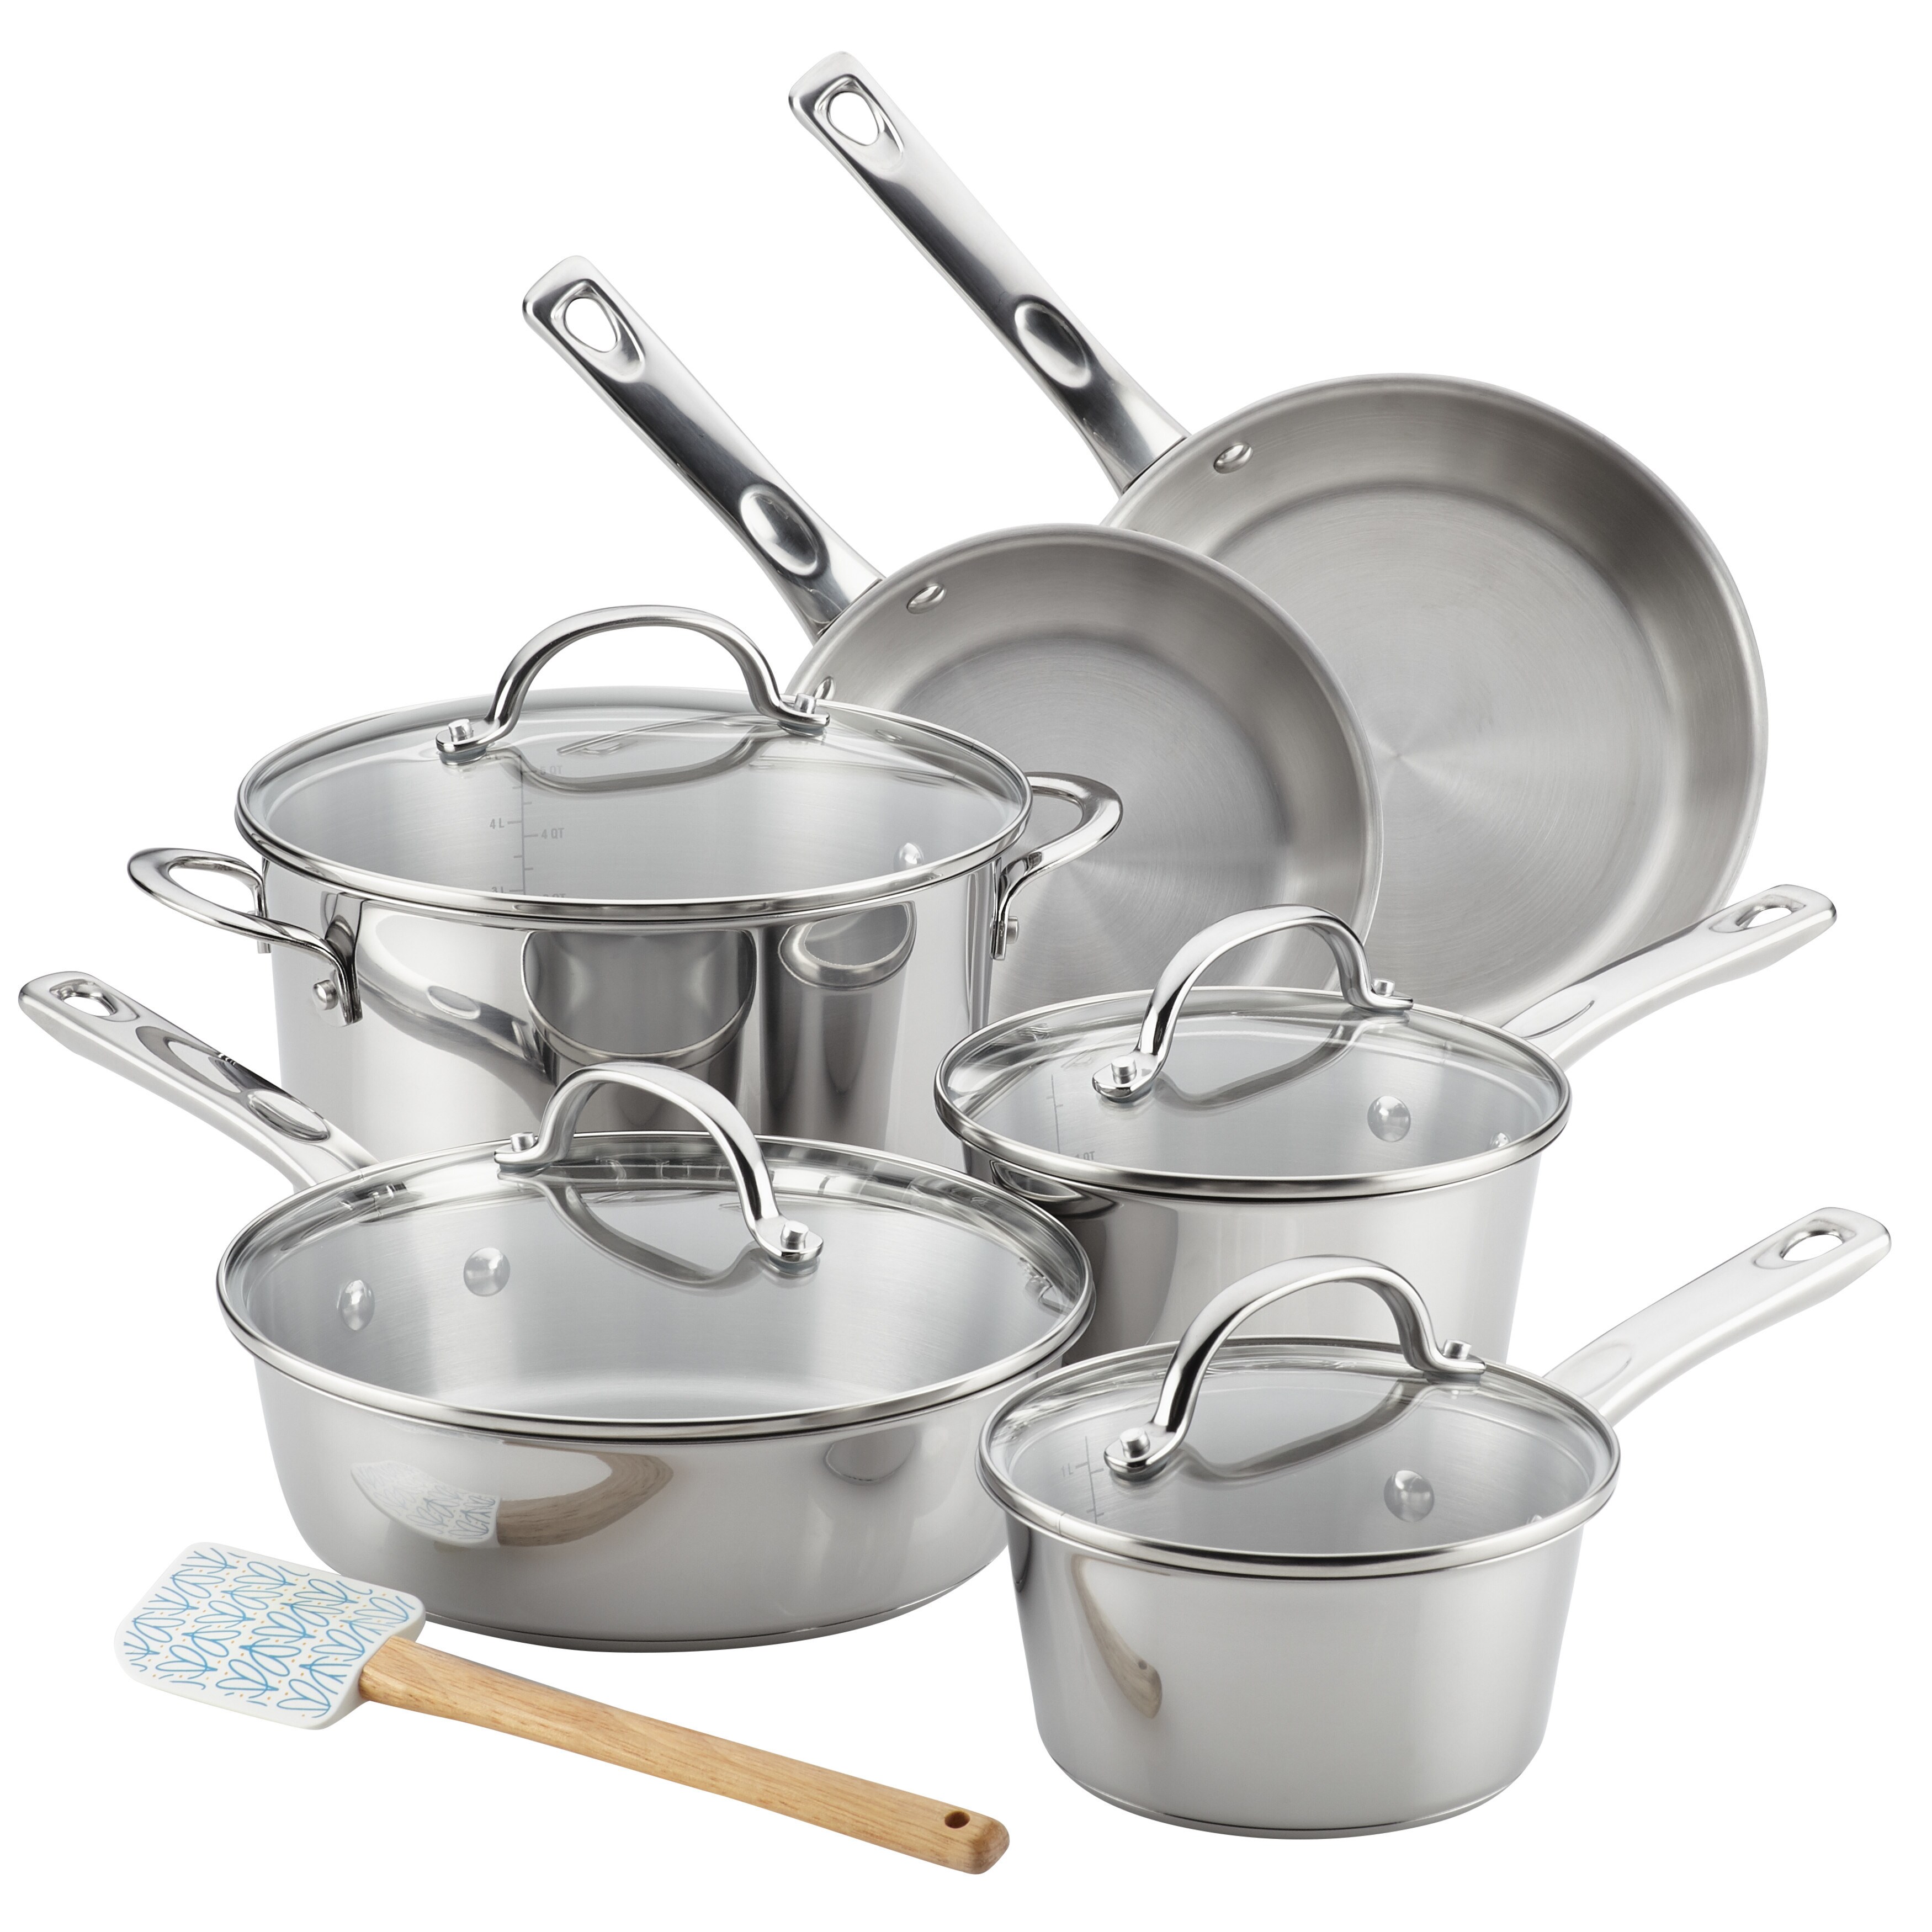 https://ak1.ostkcdn.com/images/products/19978199/Ayesha-Curry-Home-Collection-Stainless-Steel-Cookware-Set-11-Piece-85d1a32f-7c51-47c3-88c0-930e249e6520.jpg